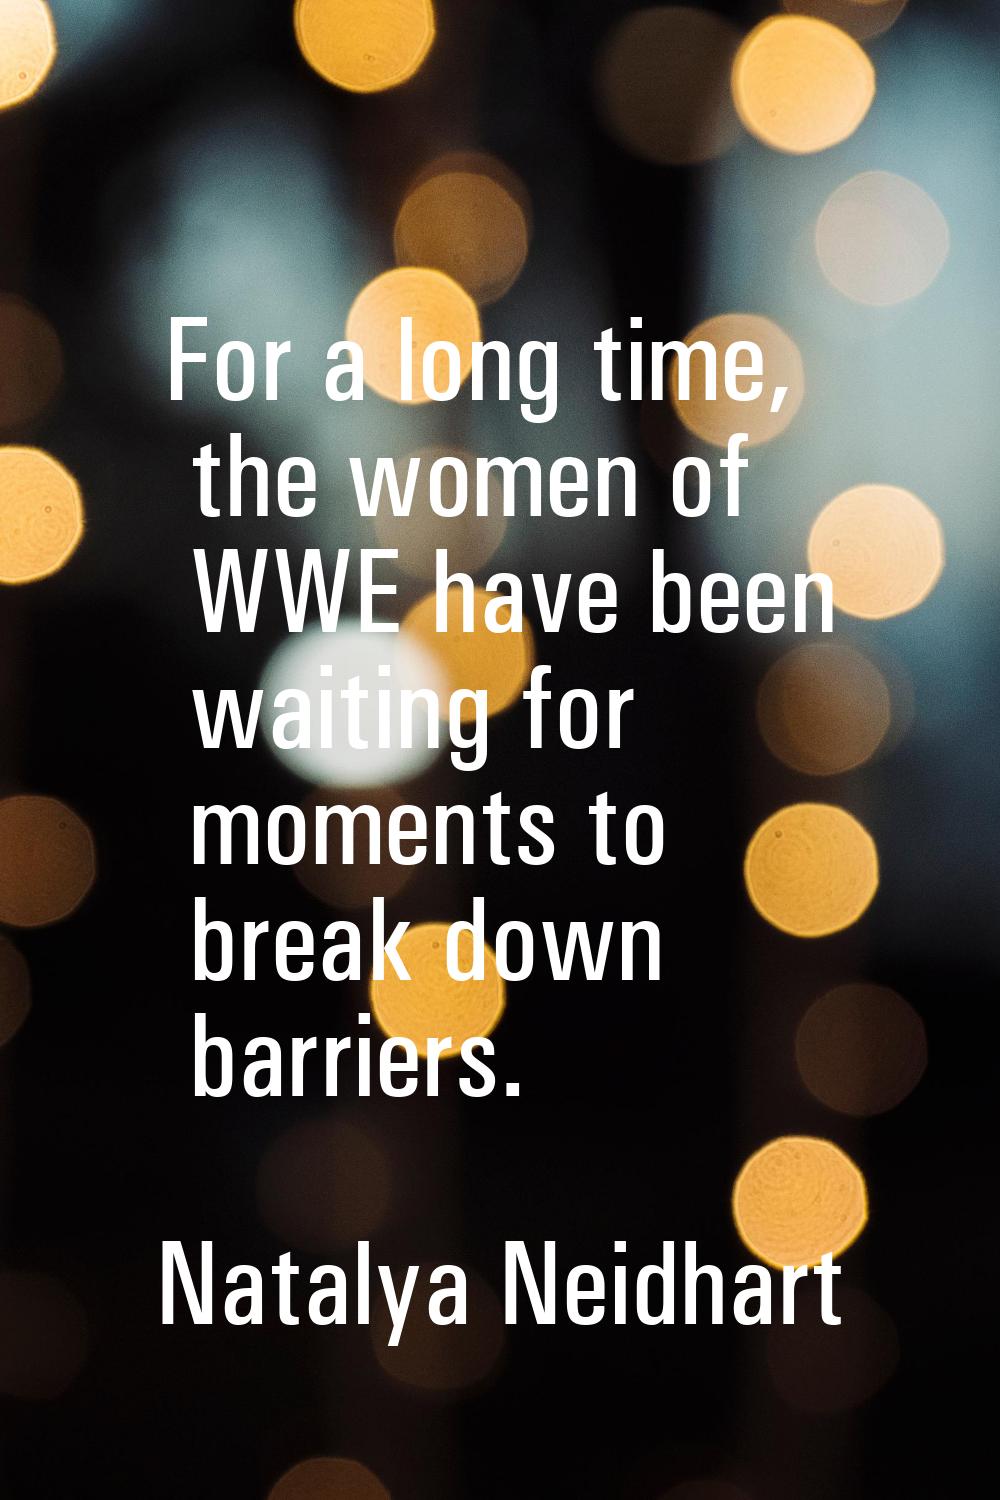 For a long time, the women of WWE have been waiting for moments to break down barriers.